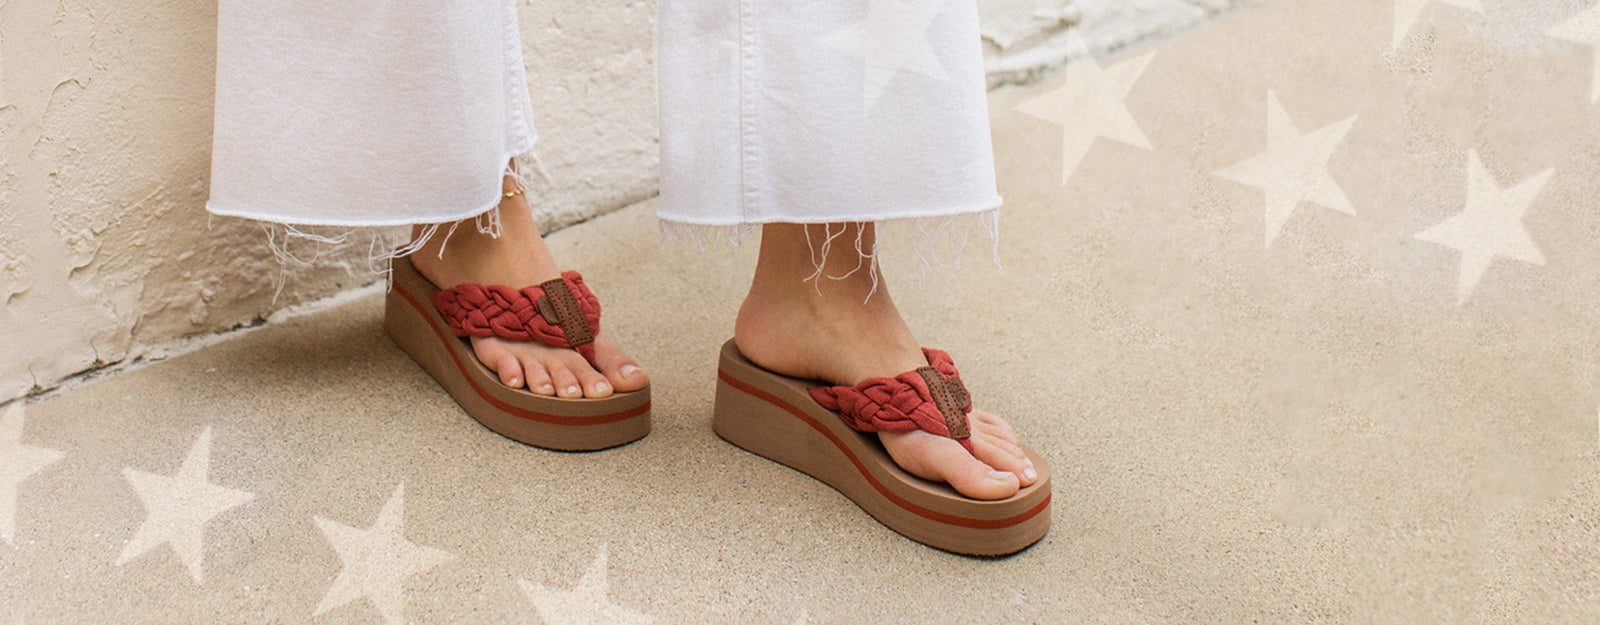 Red, White, Blue & Cute Flip Flops, Sandals, Wedges & more | Yellow Box ...